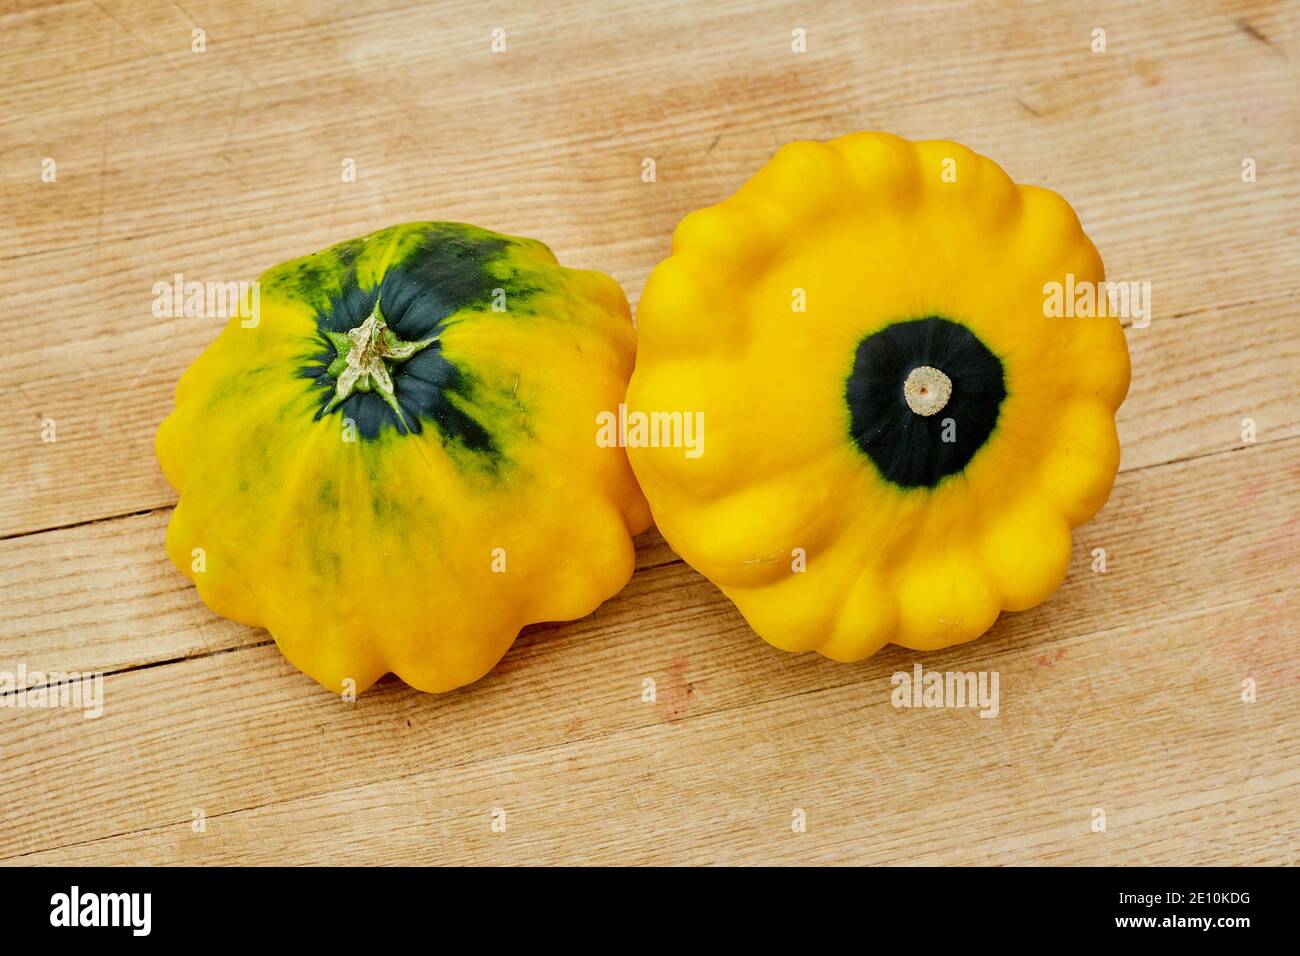 A Pair of Patty Pan Squash on a Cutting Board 2 Stock Photo